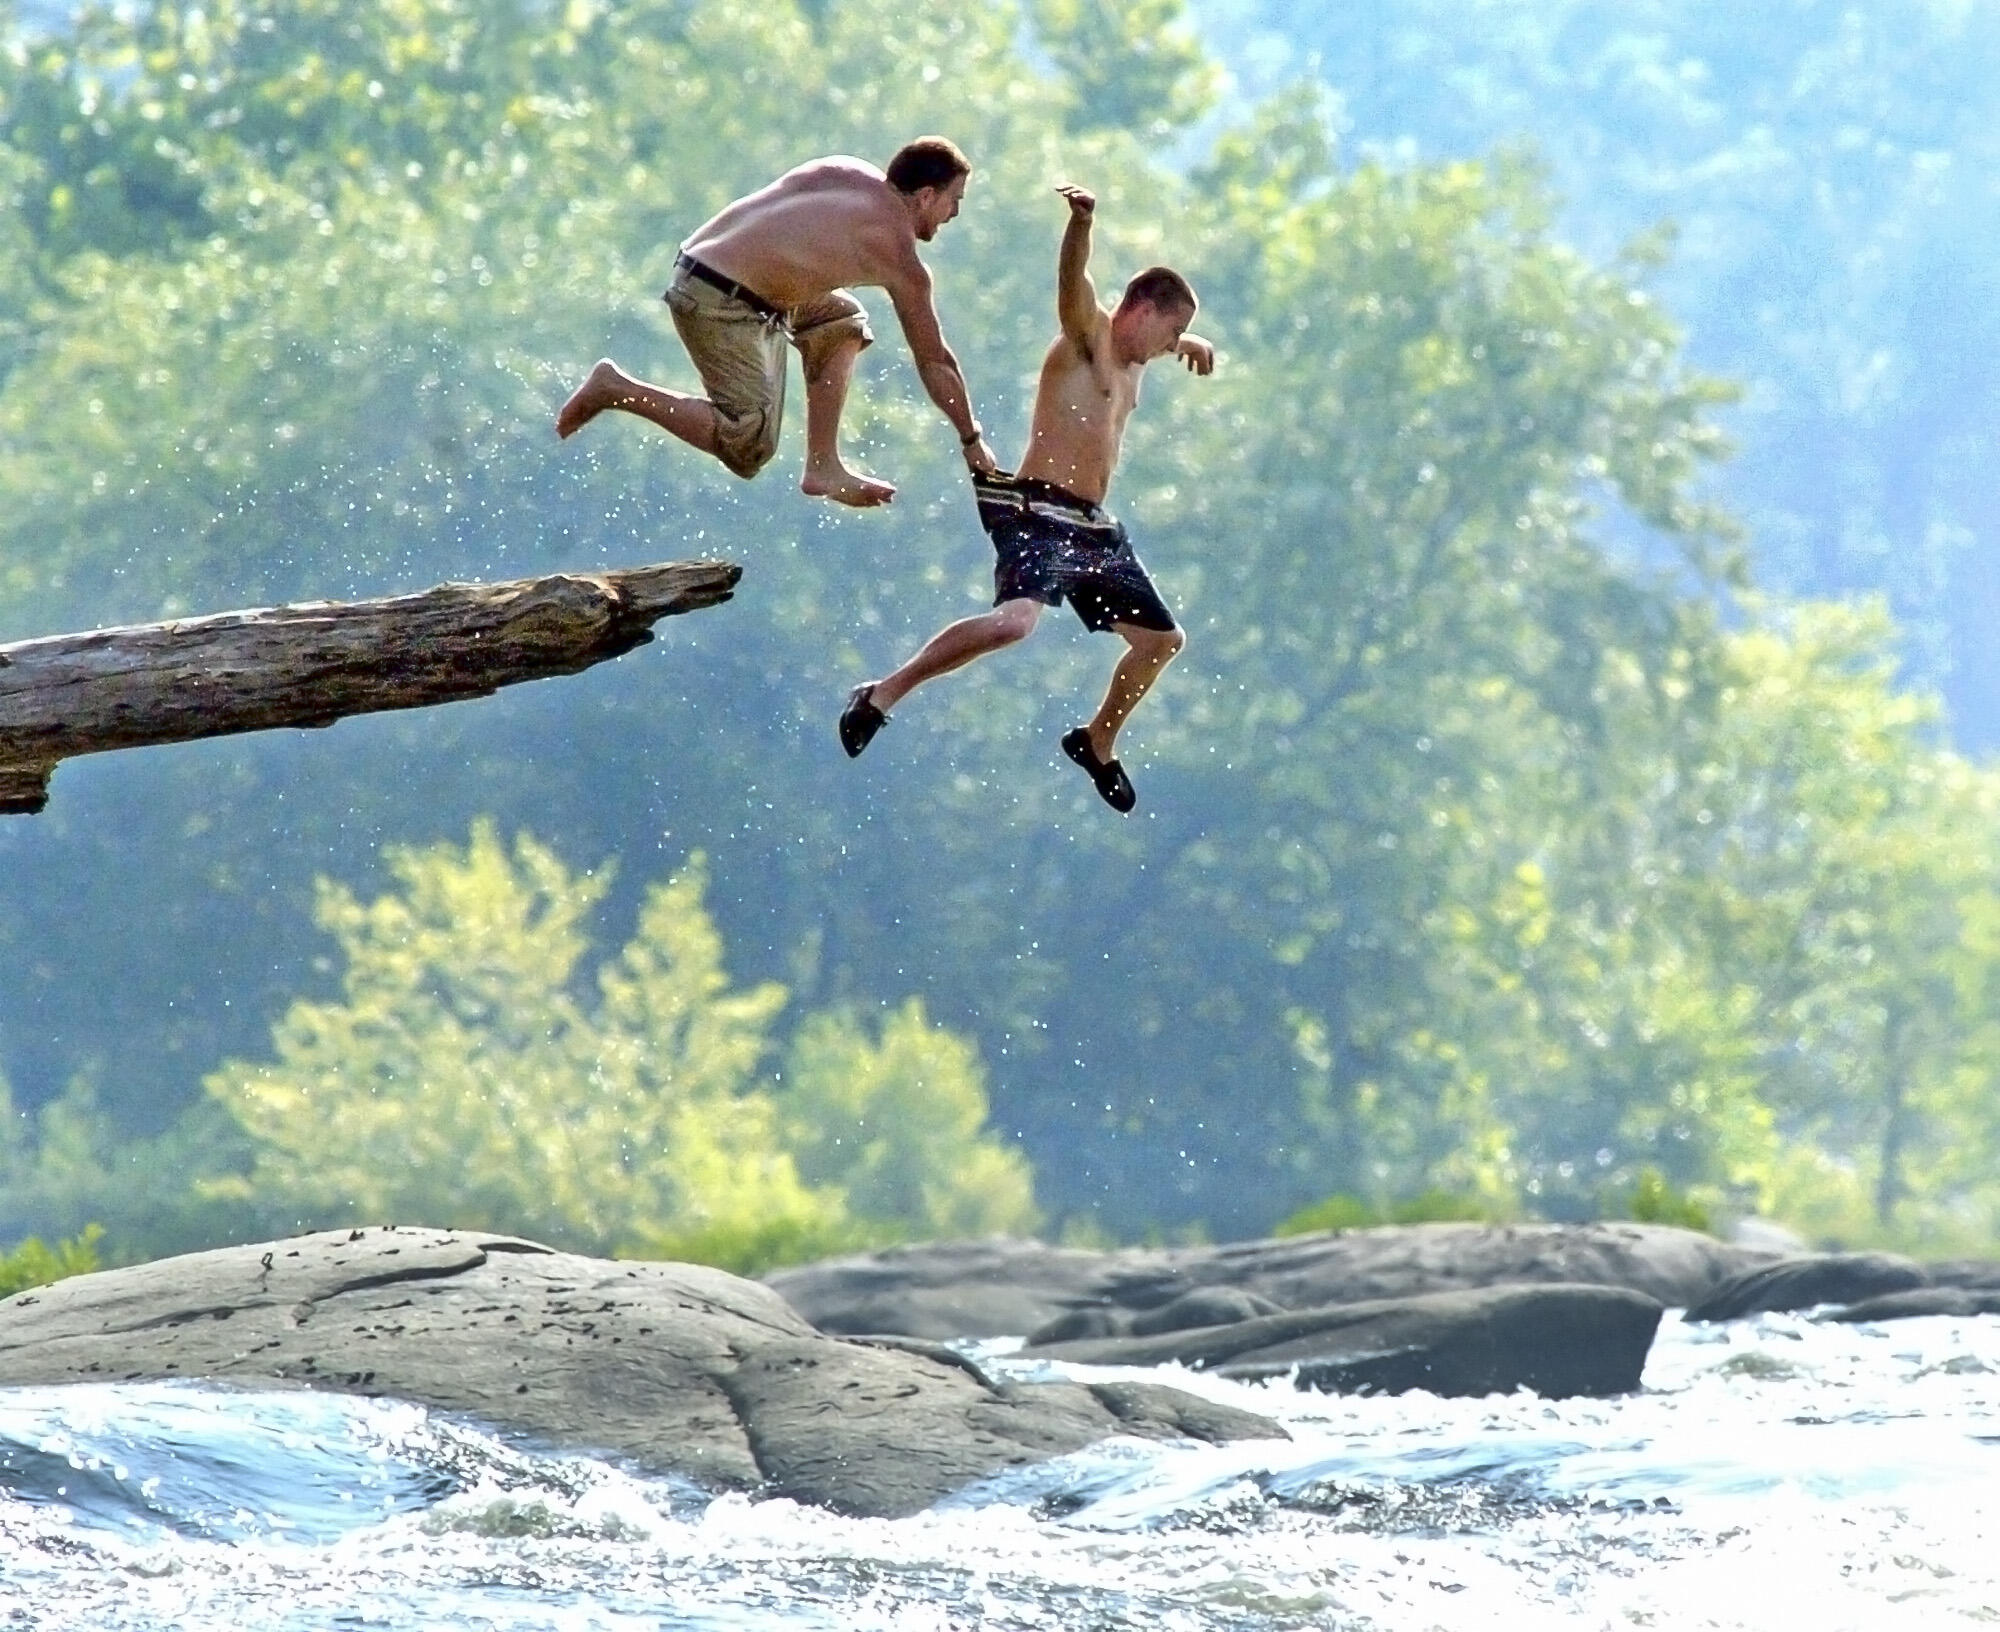 A photo of two men jumping off a rock into a river